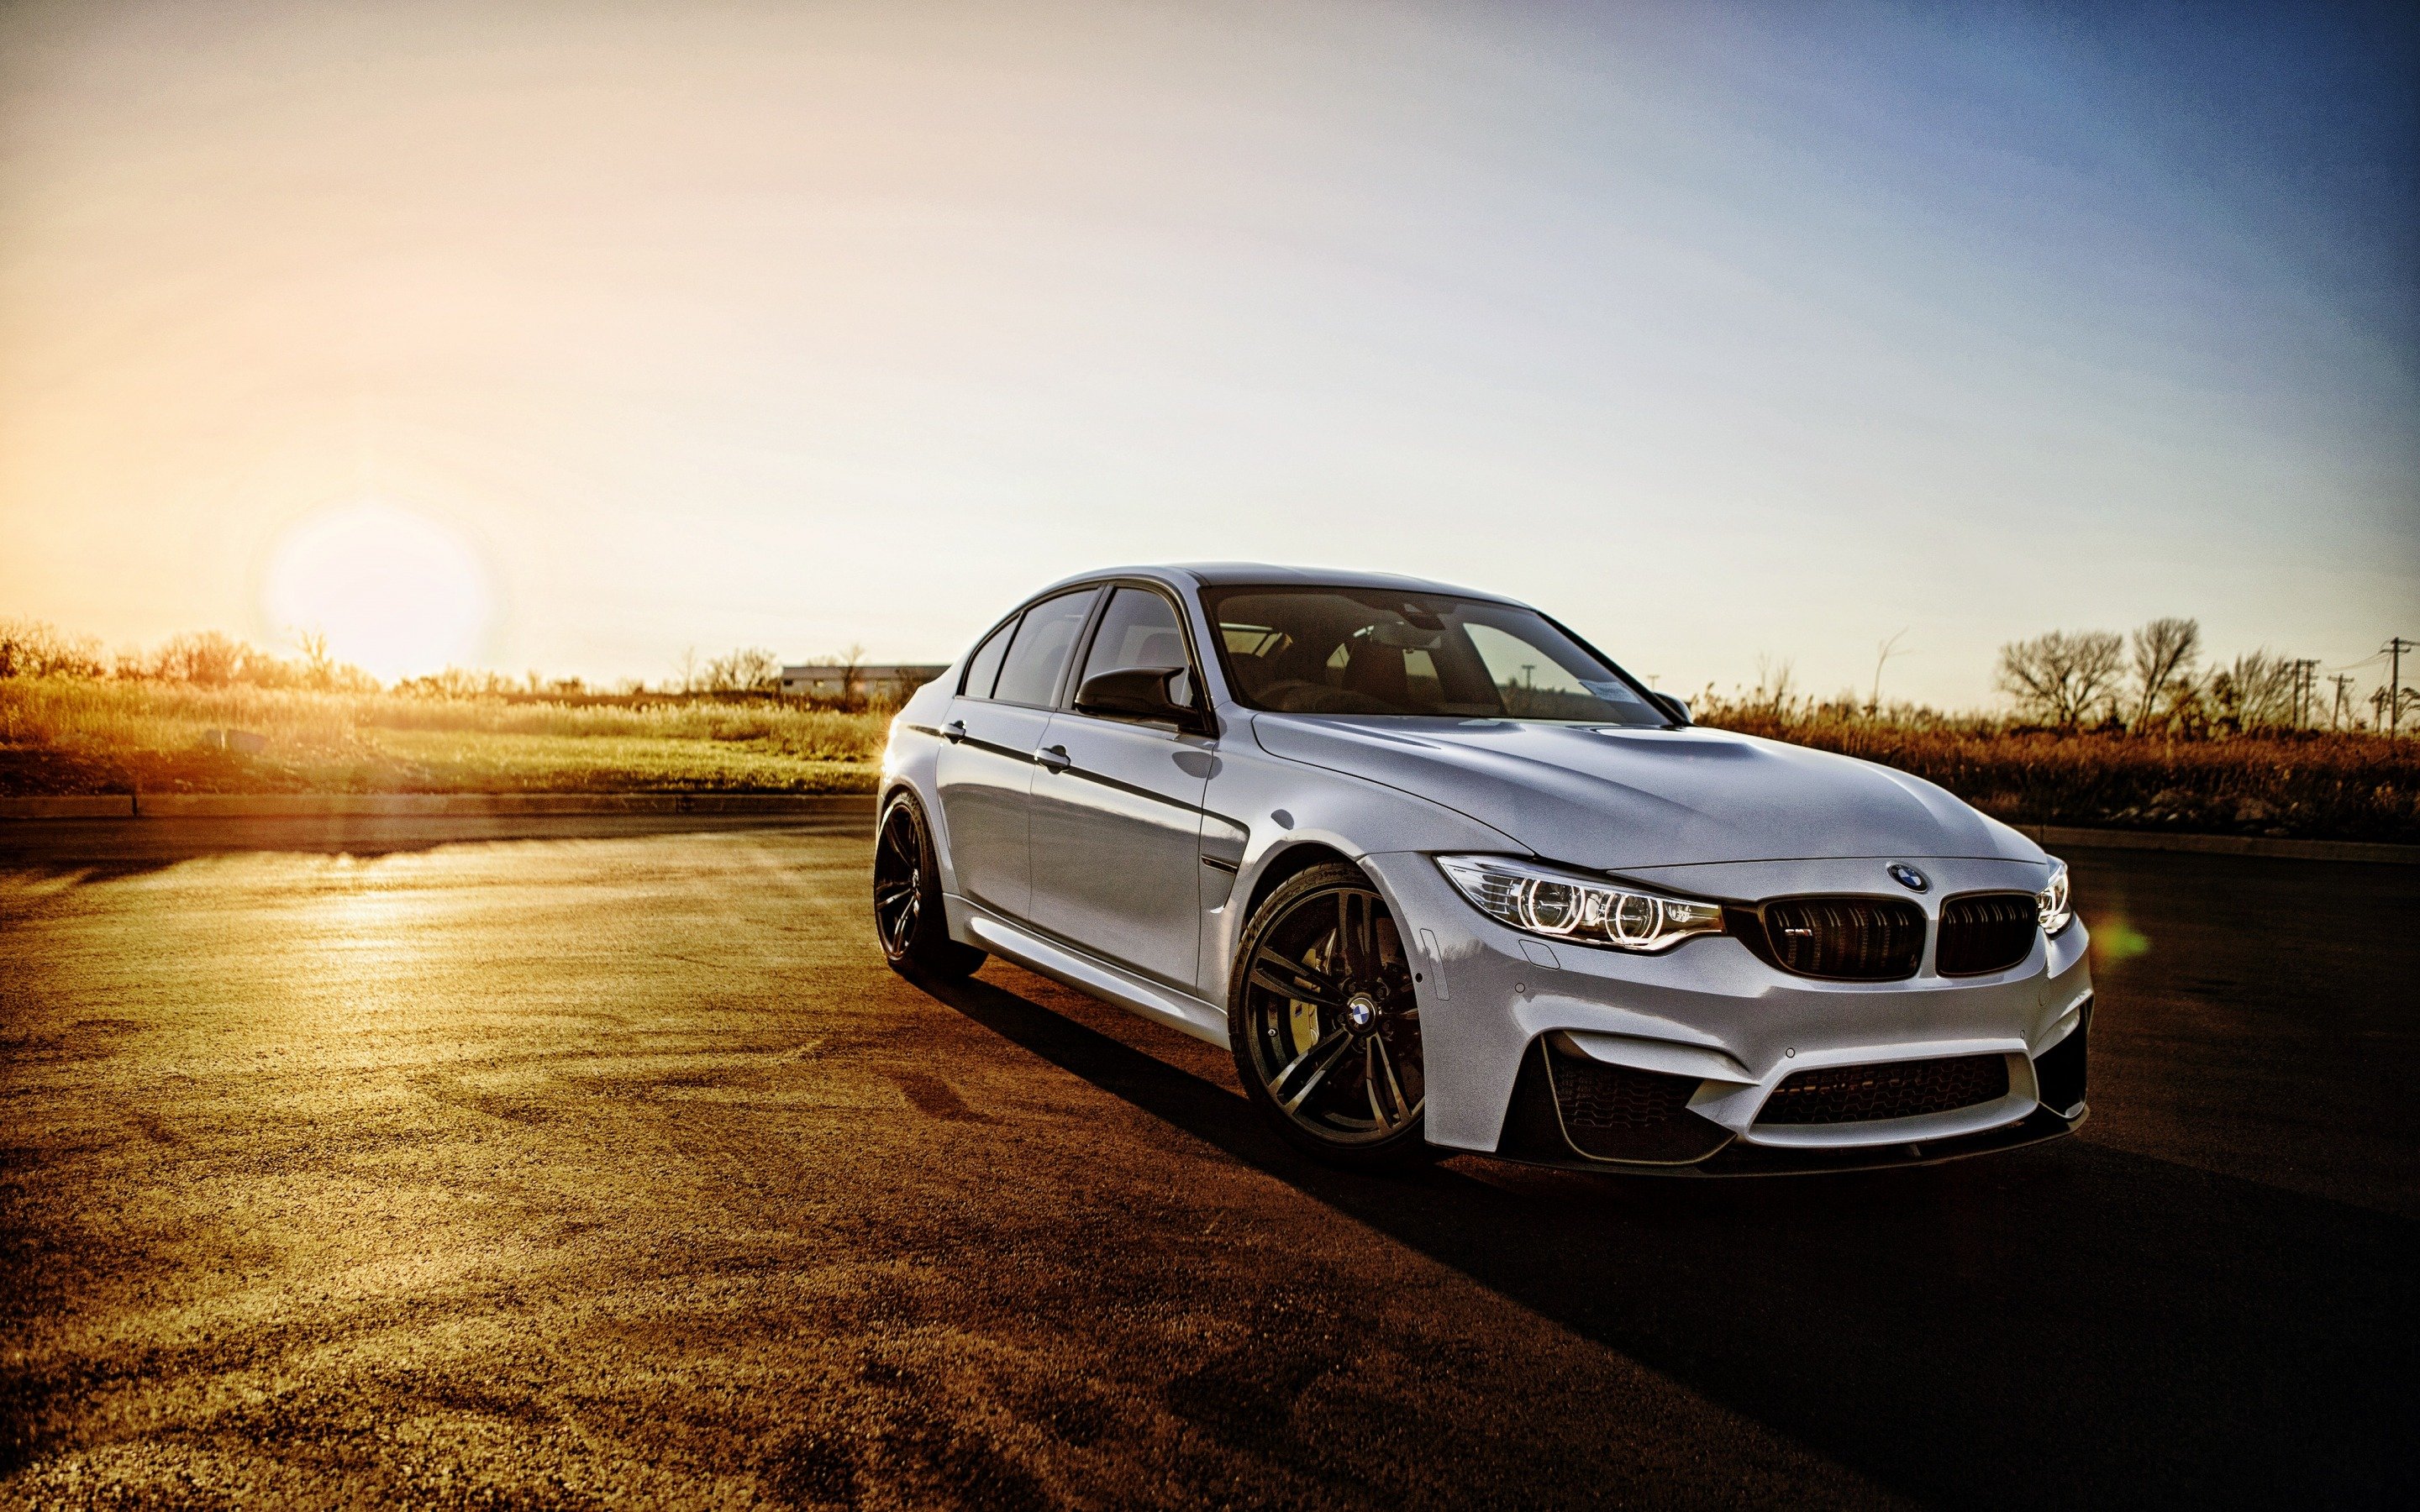 Download wallpapers BMW M3, 2017, F80, German cars, white M3, sedan, sunset, BMW for desktop with resolution 2880x1800. High Quality HD pictures wallpapers